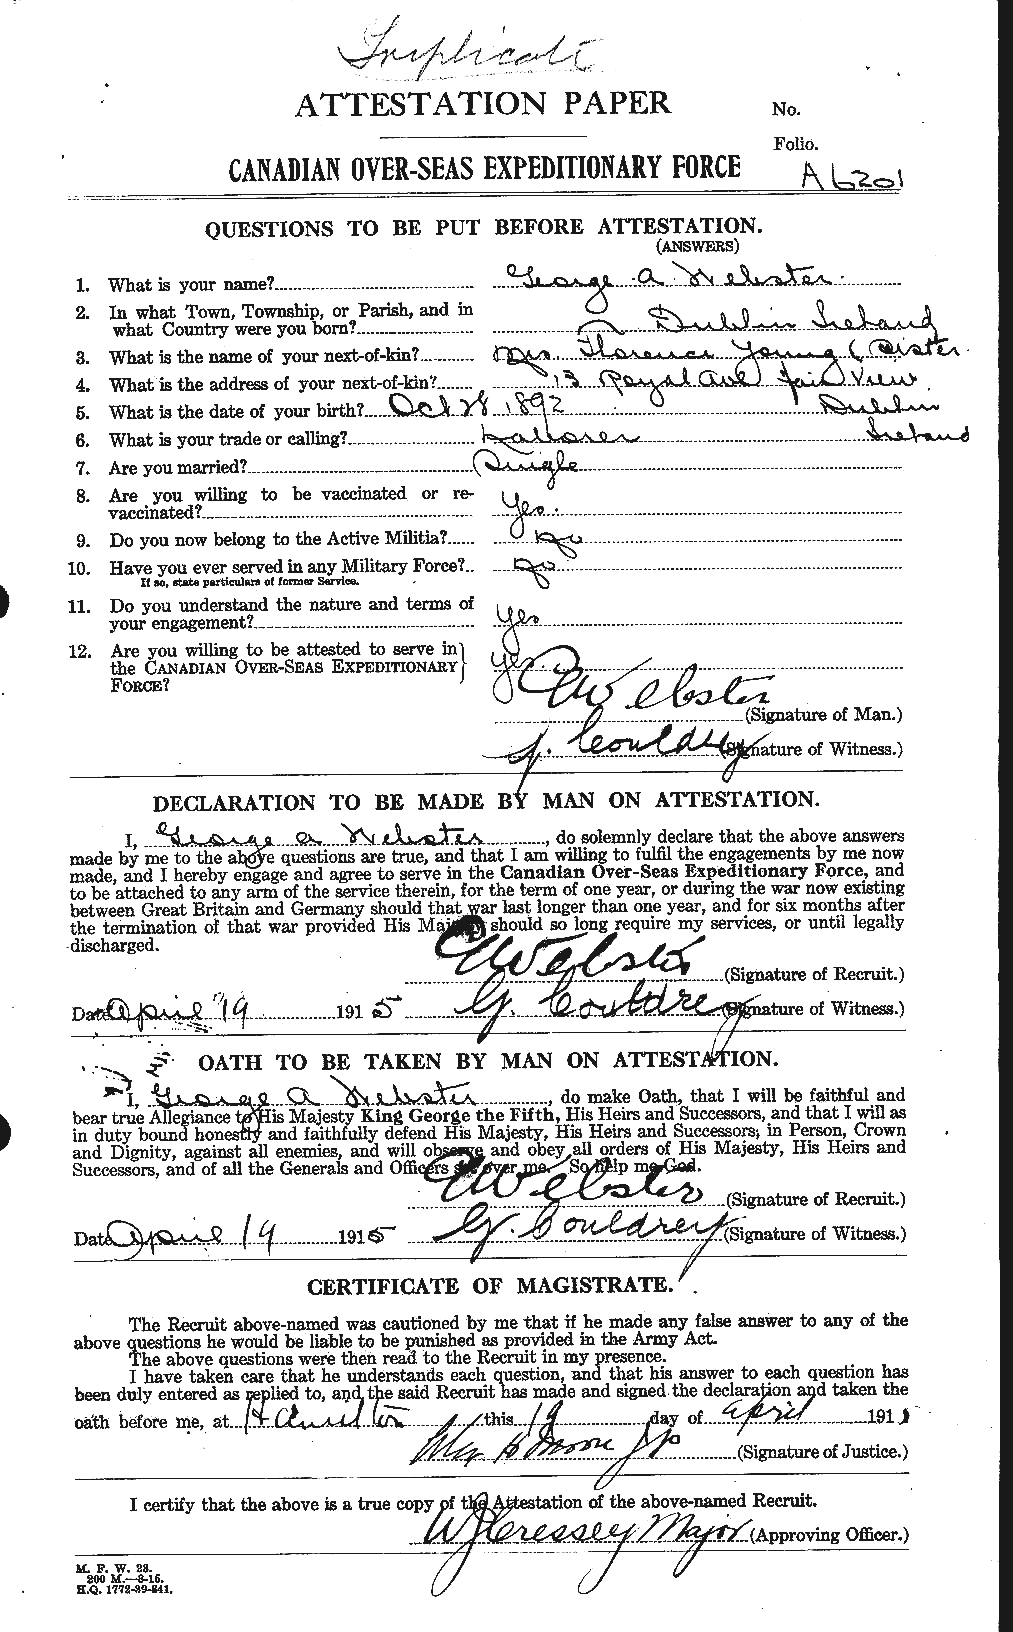 Personnel Records of the First World War - CEF 670380a